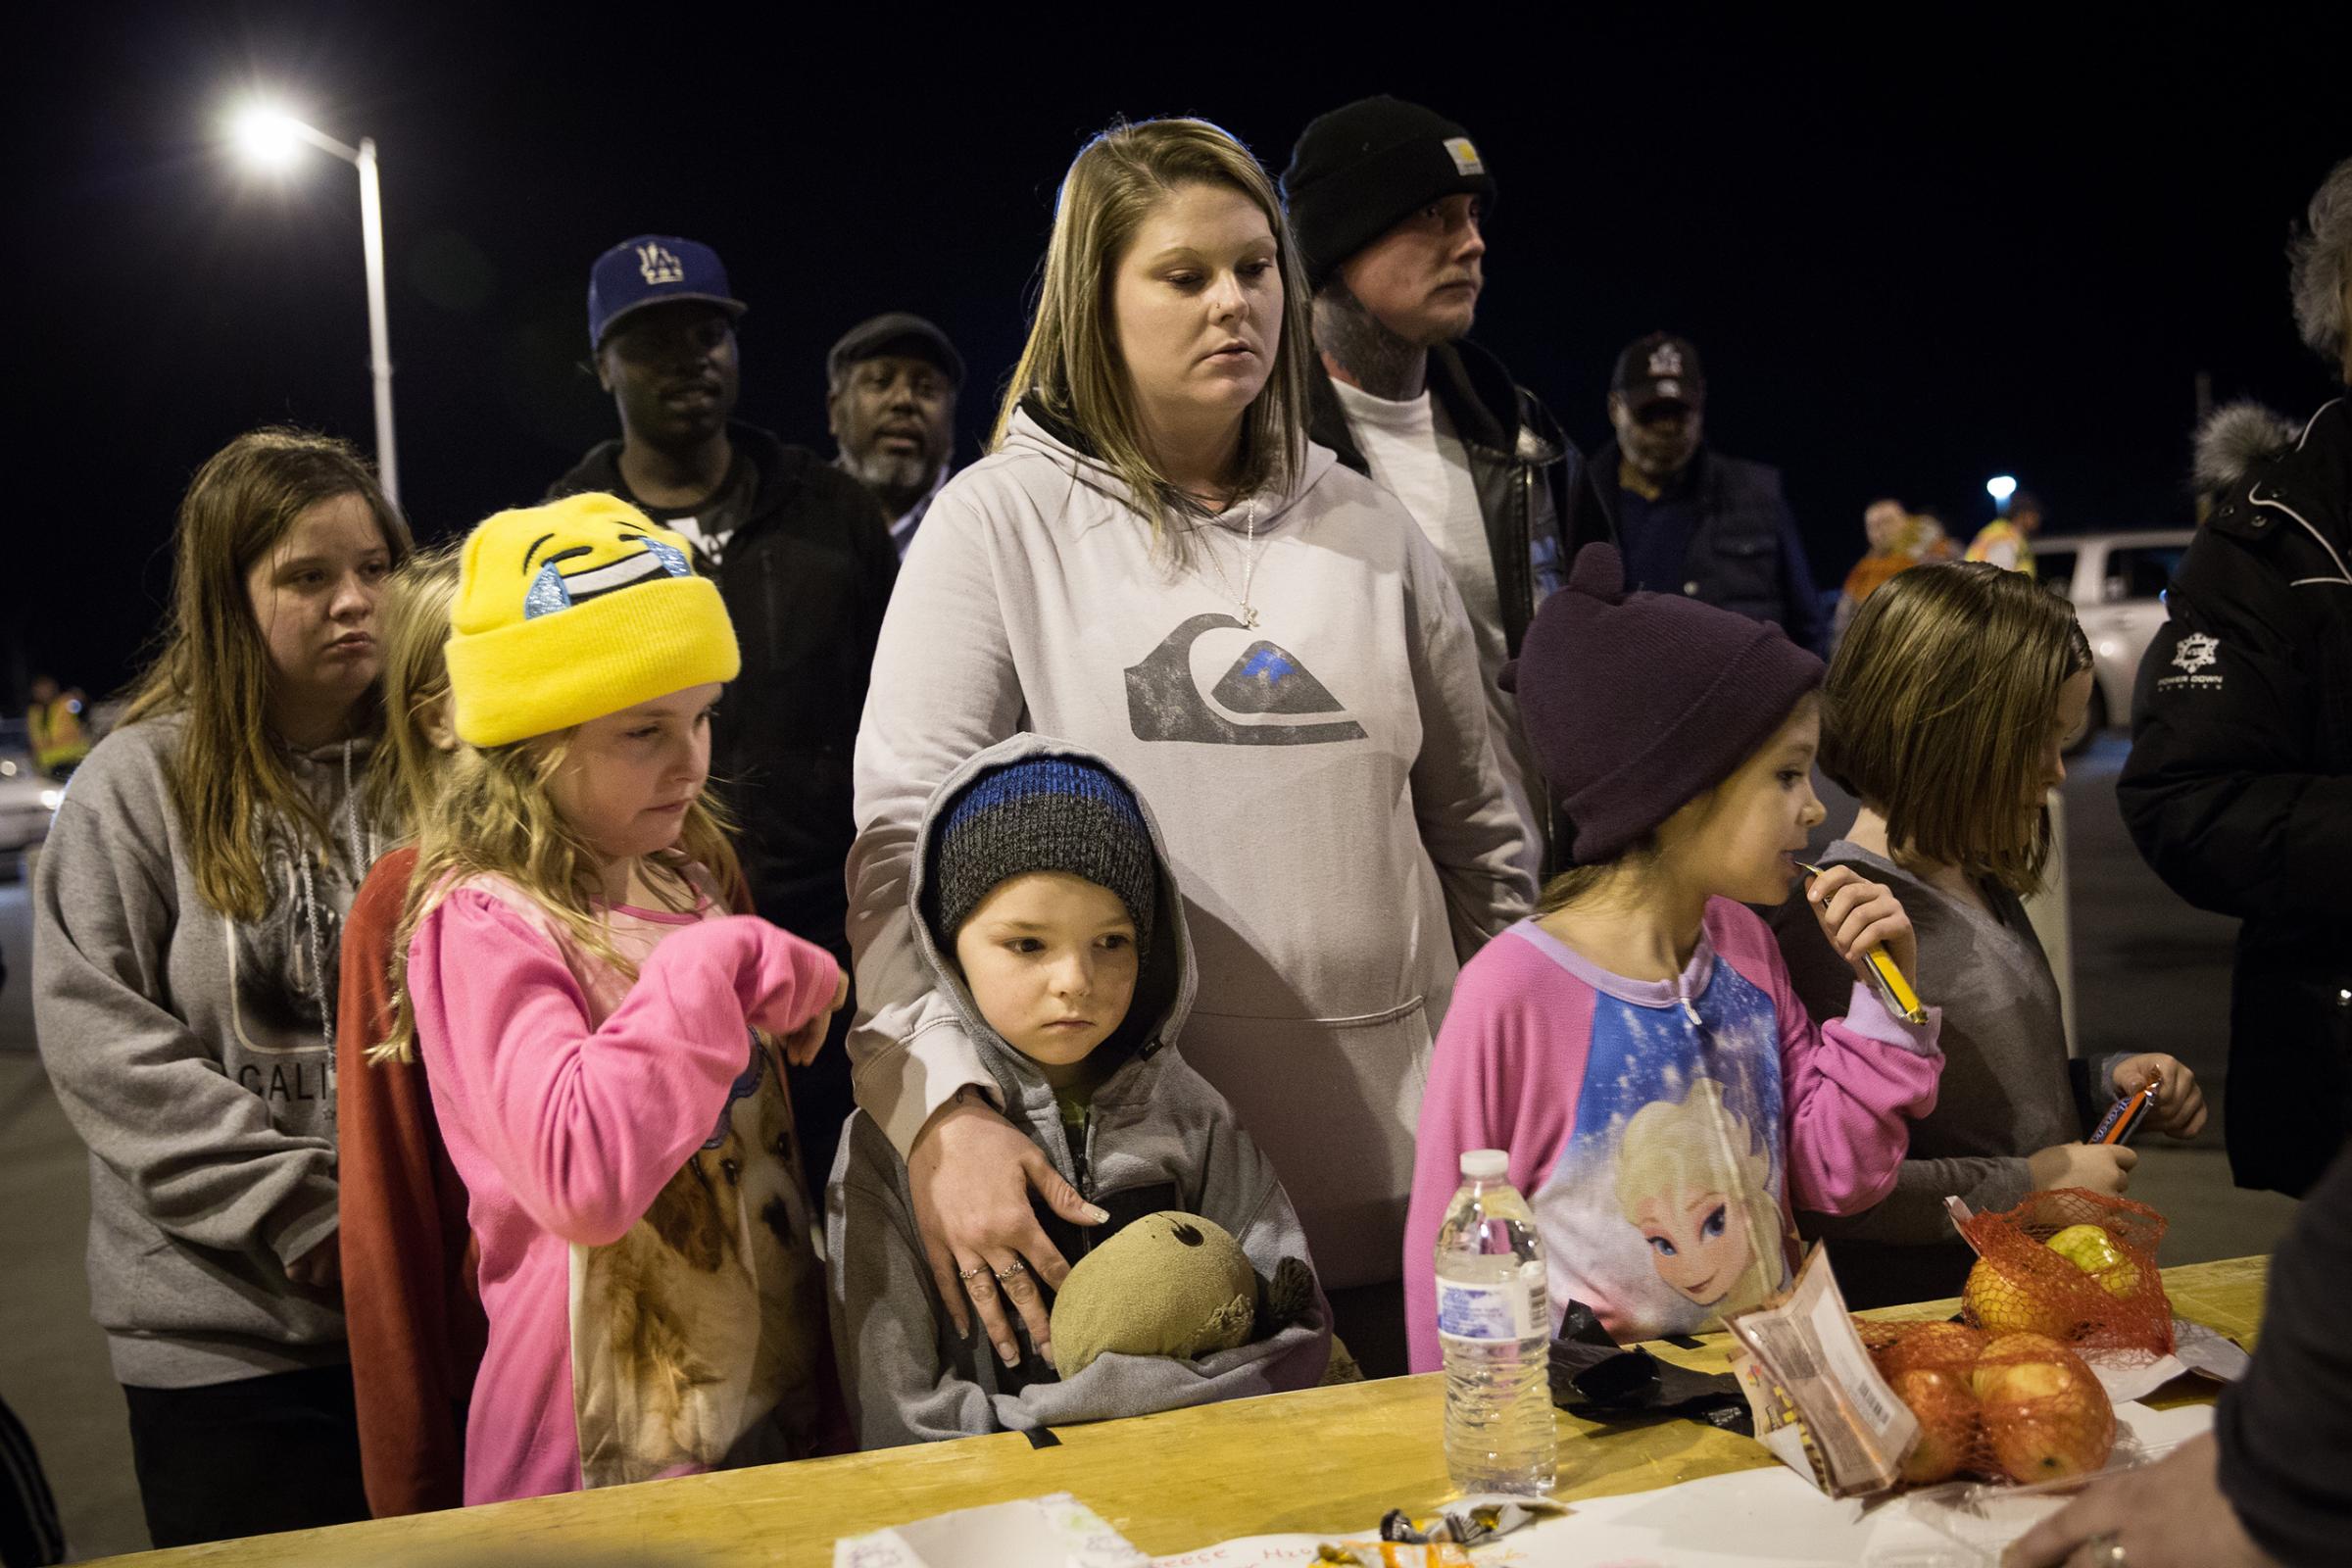 The McCaskill family of Oroville waits for more pizza to arrive outside the evacuation center at the Butte County Fairgrounds in Chico, California on Feb. 12, 2017.